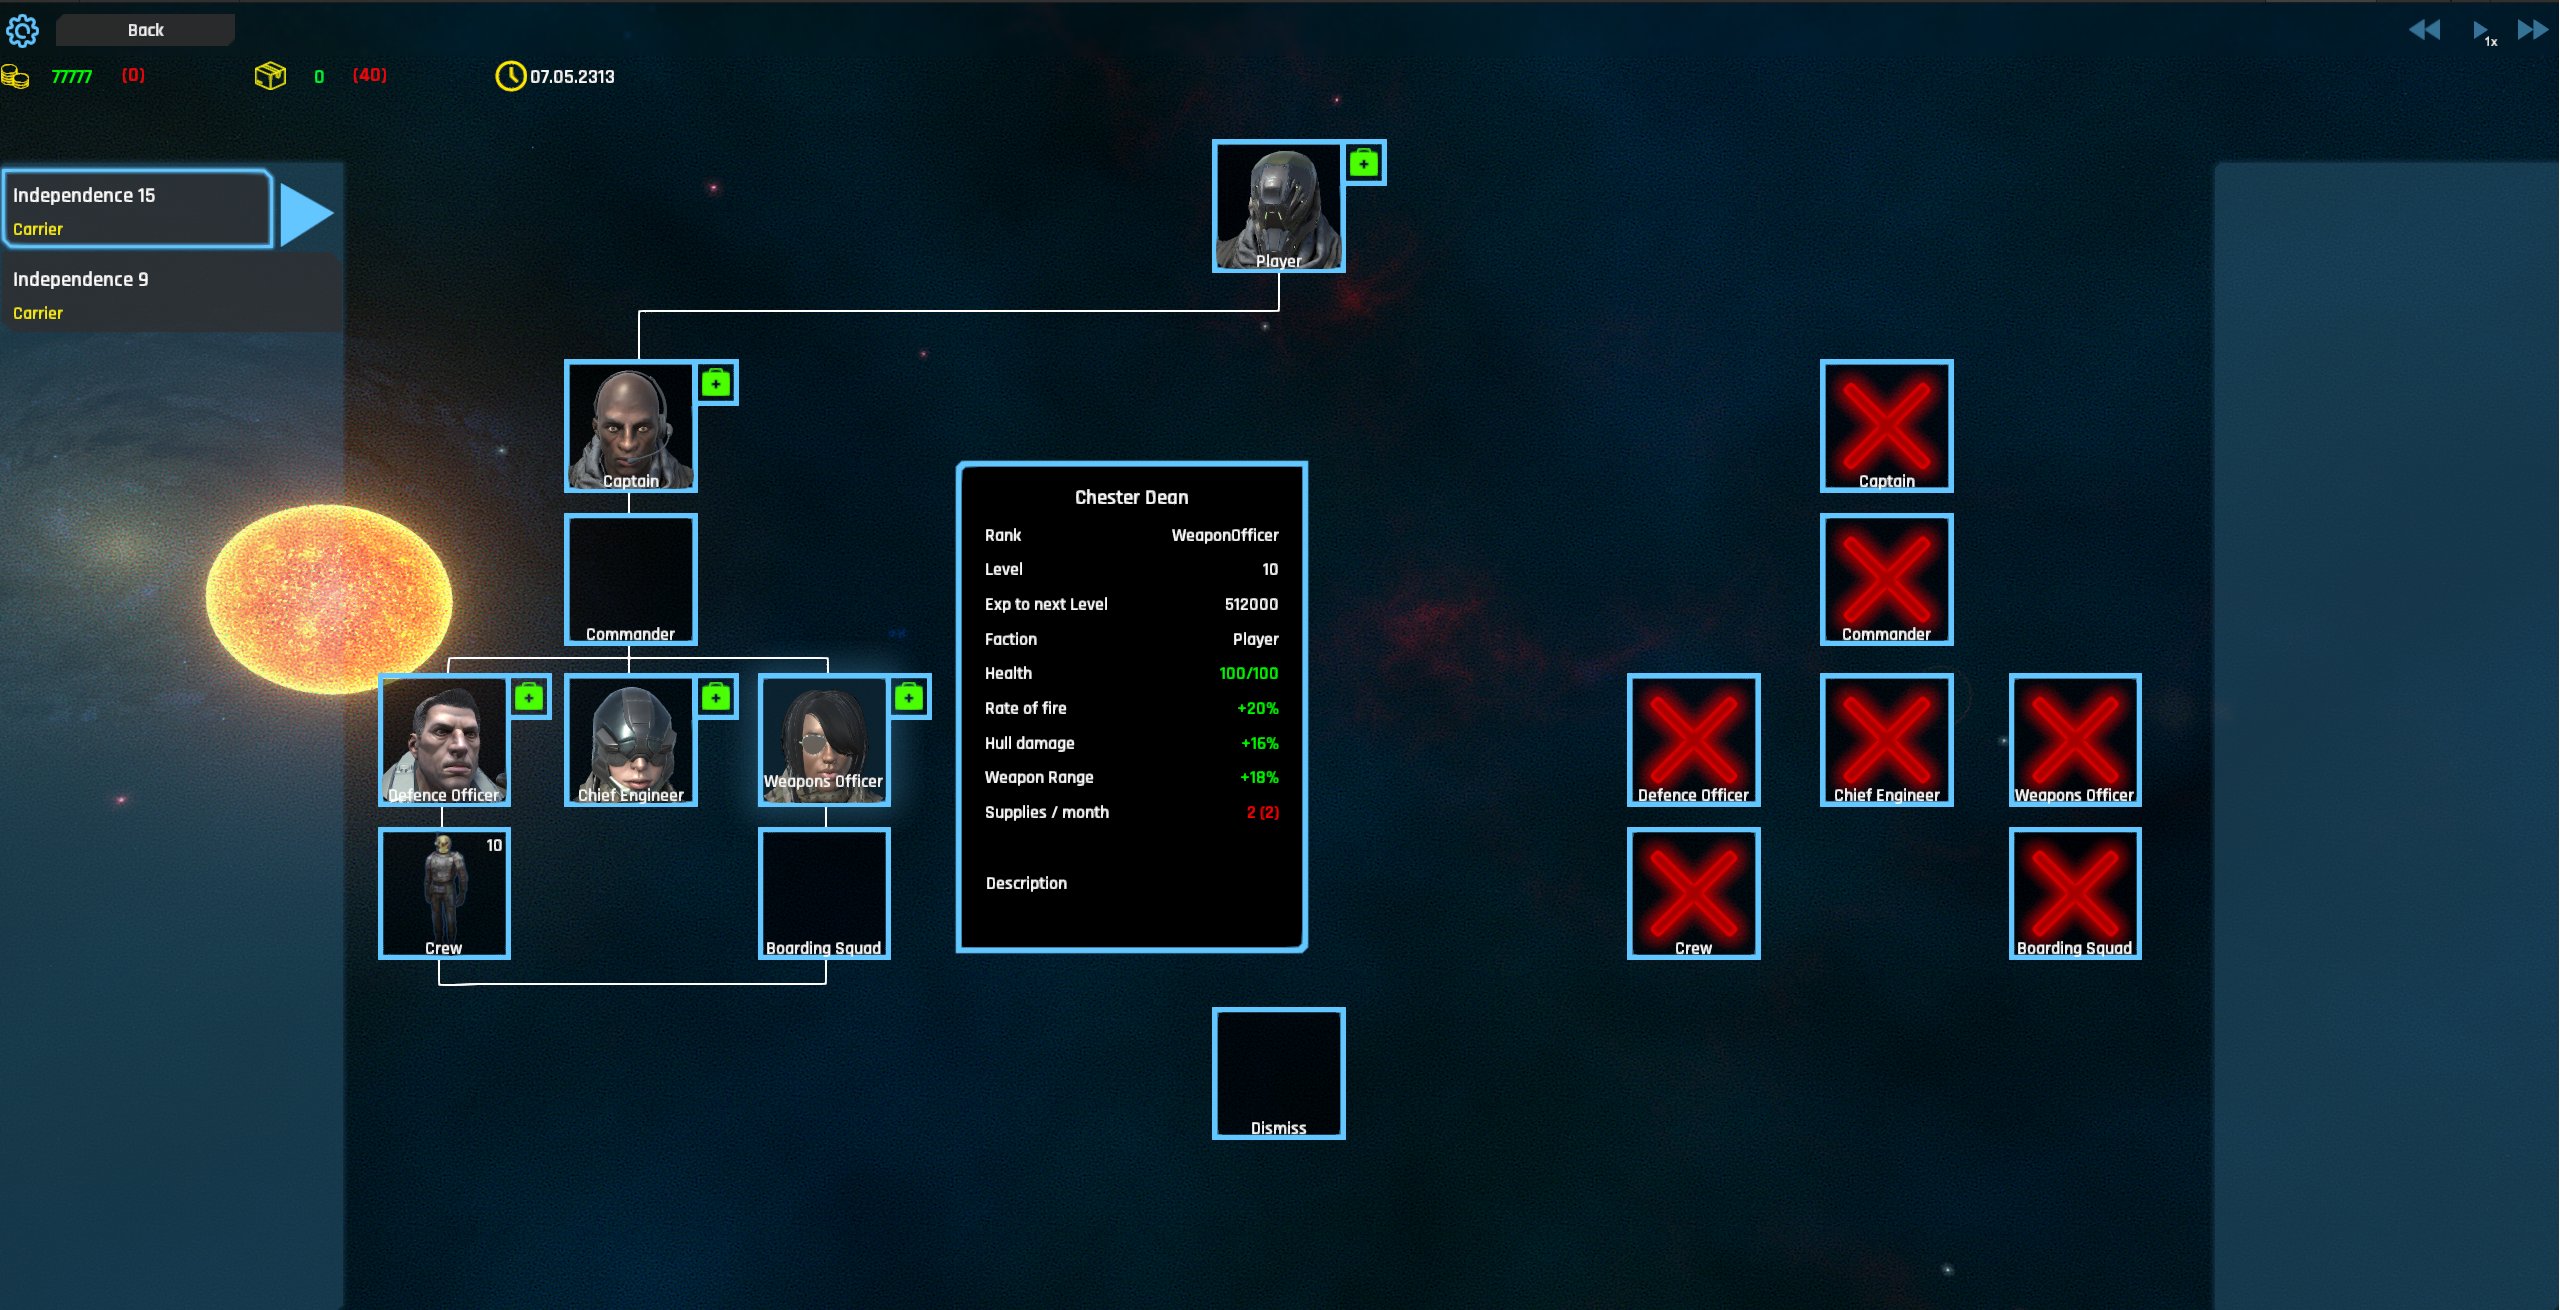 The crew screen where the player can review that fleet's crew and assign its positions.